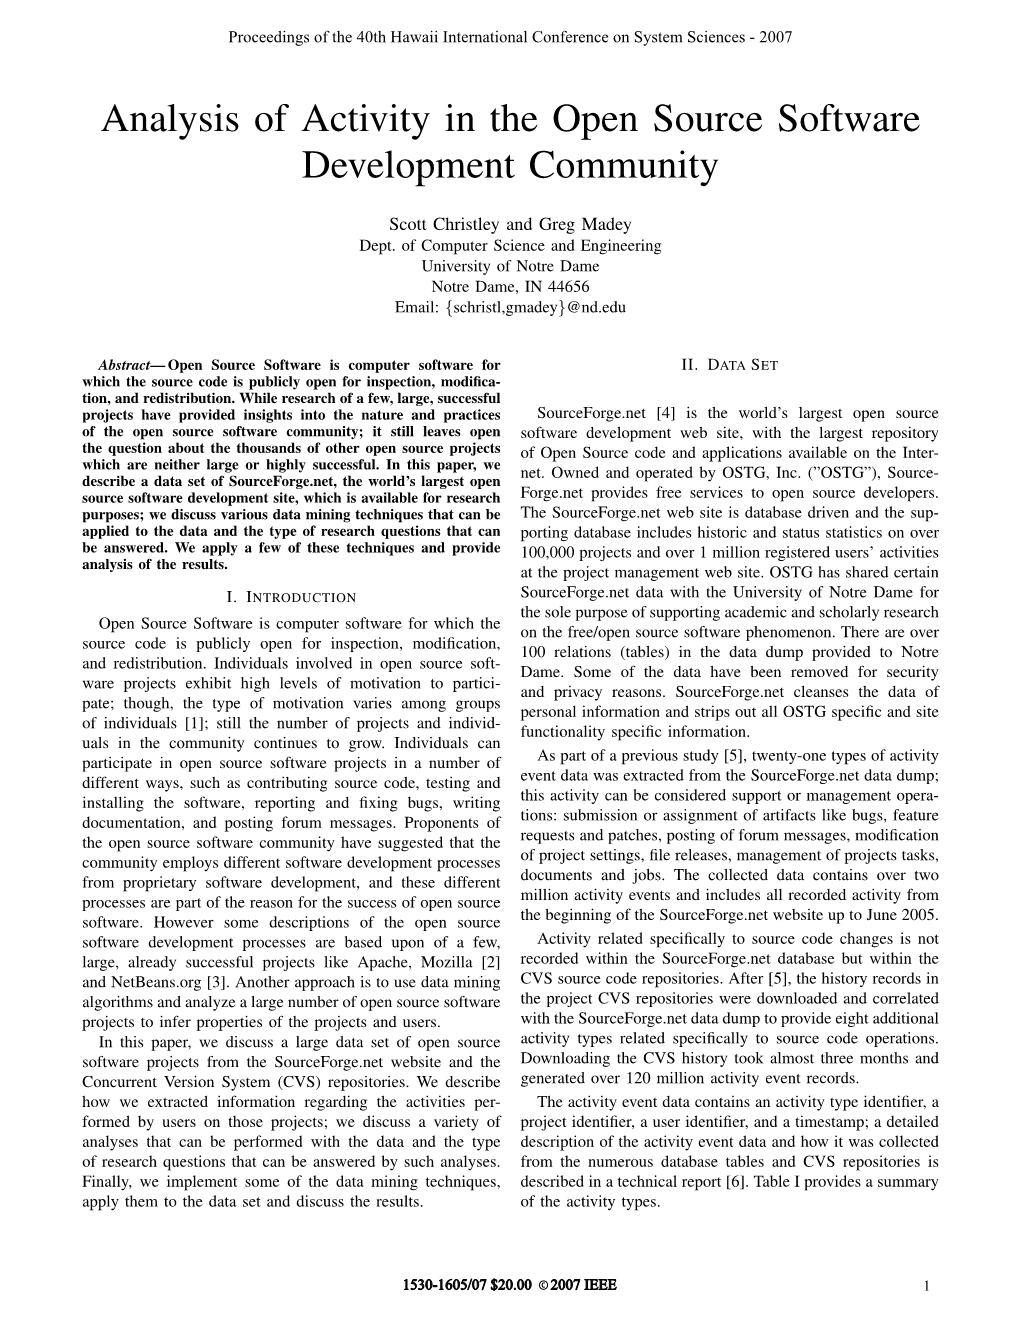 Analysis of Activity in the Open Source Software Development Community